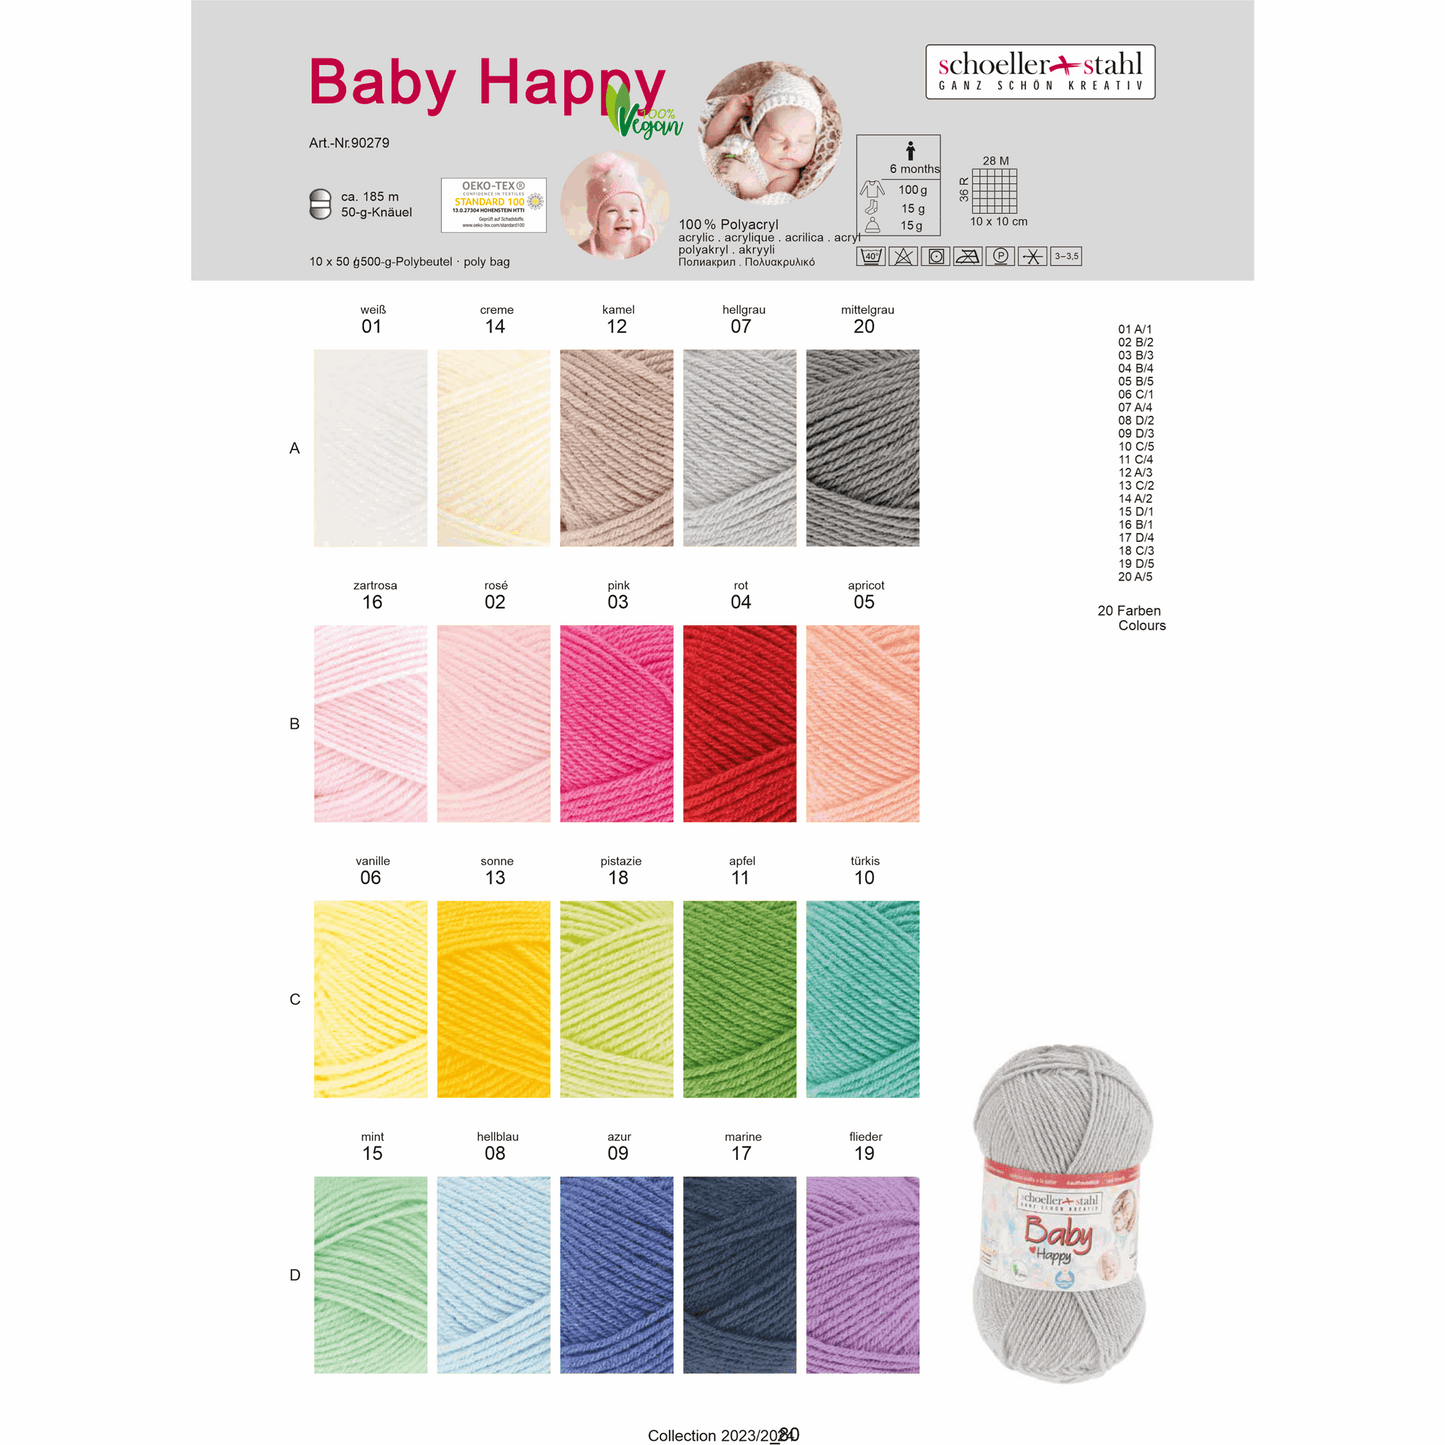 Baby happy 50g, 90279, Farbe 13, sonne